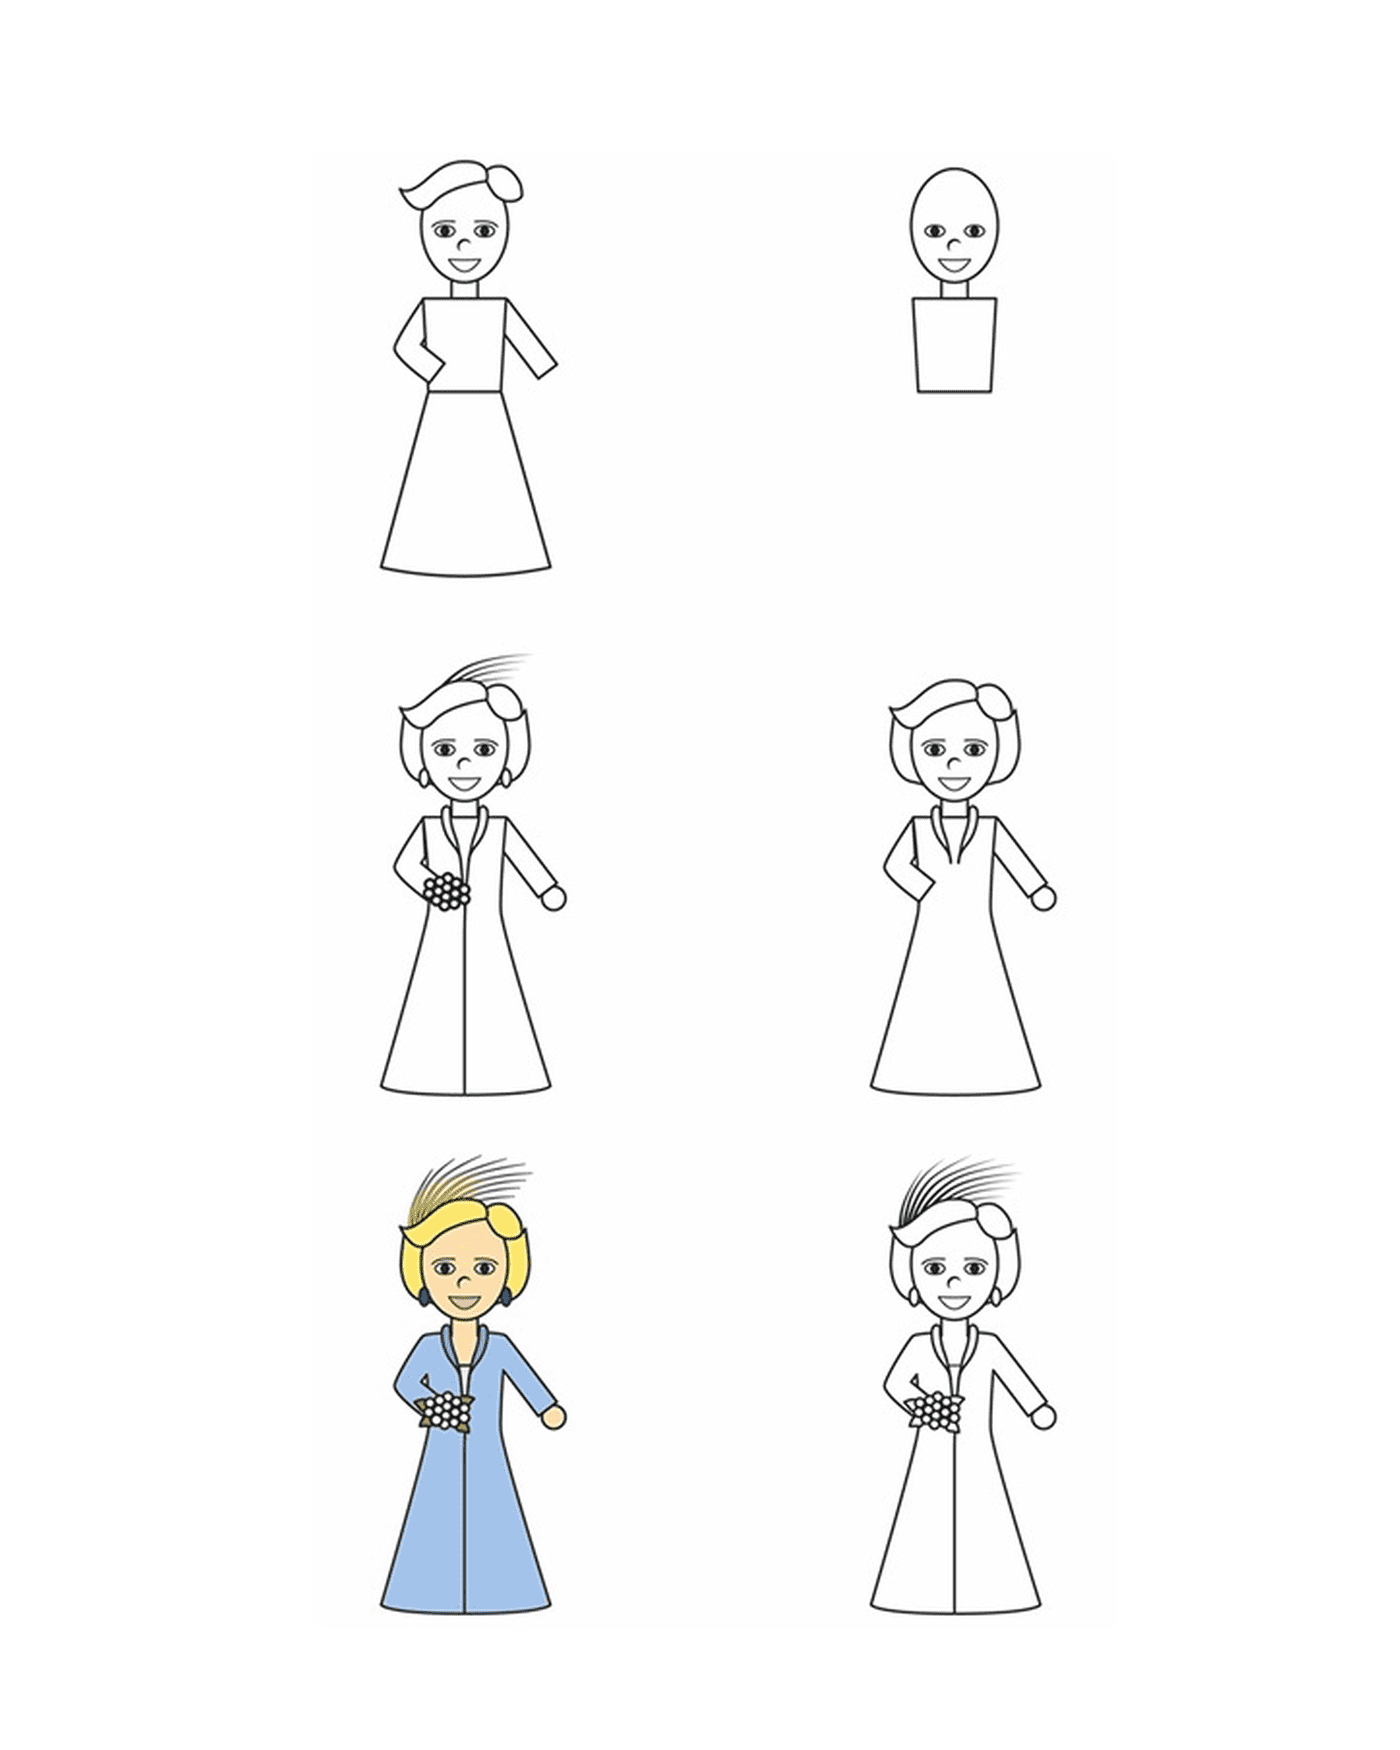  How to draw a girl step by step 